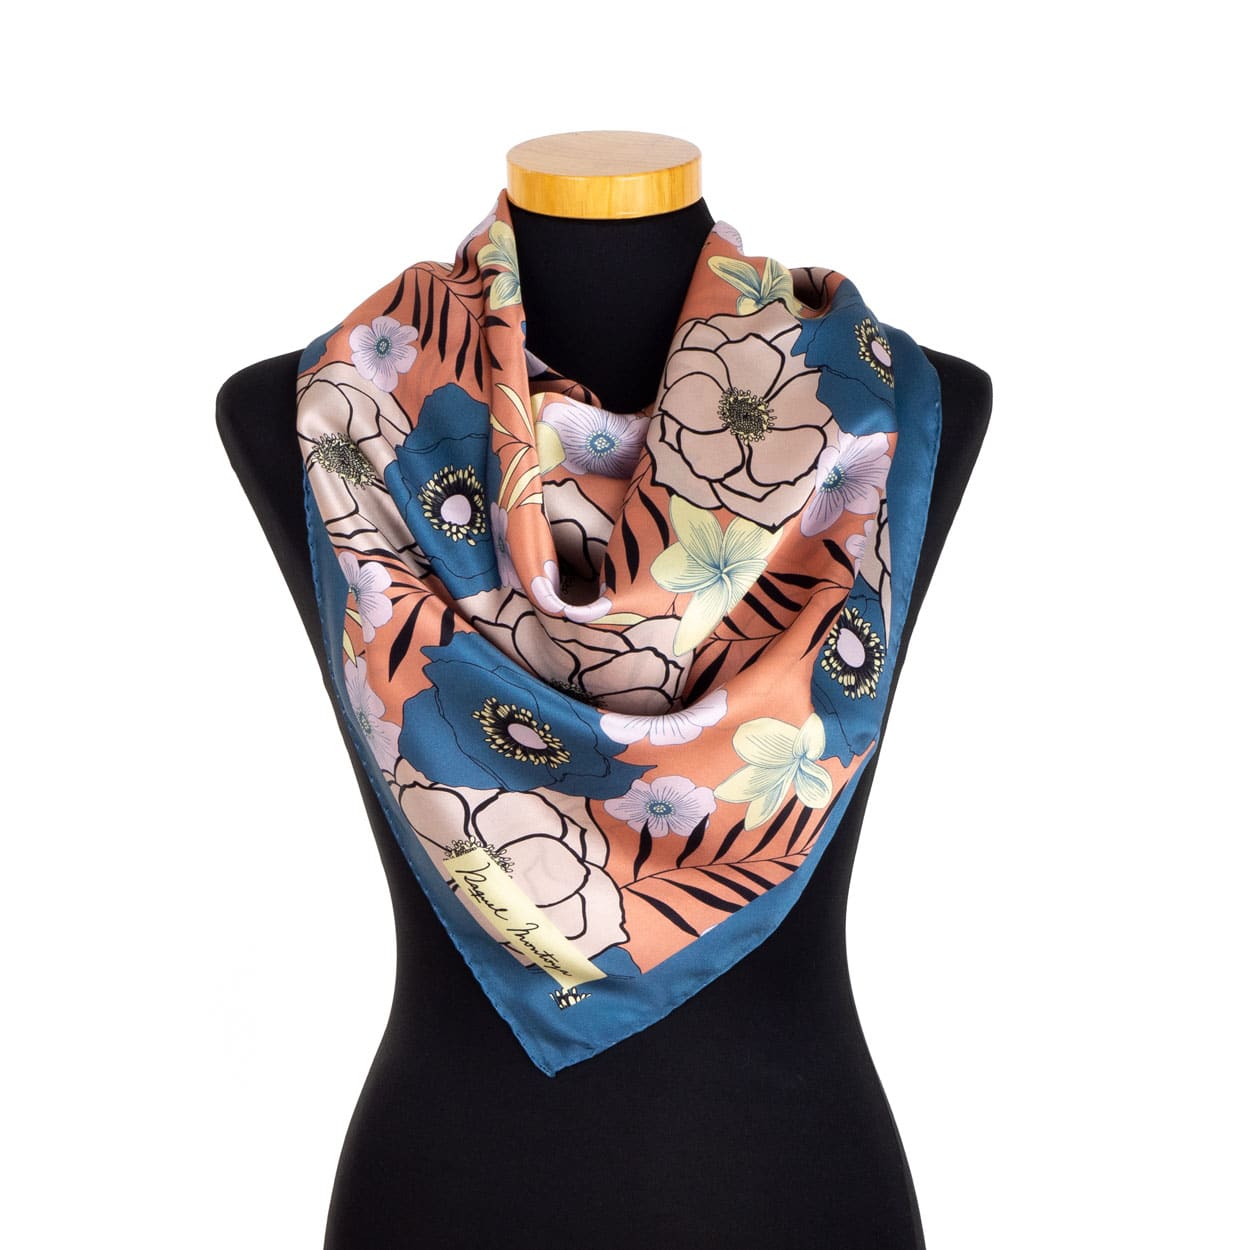 Square scarf with tropical style flowers in blue and orange colors